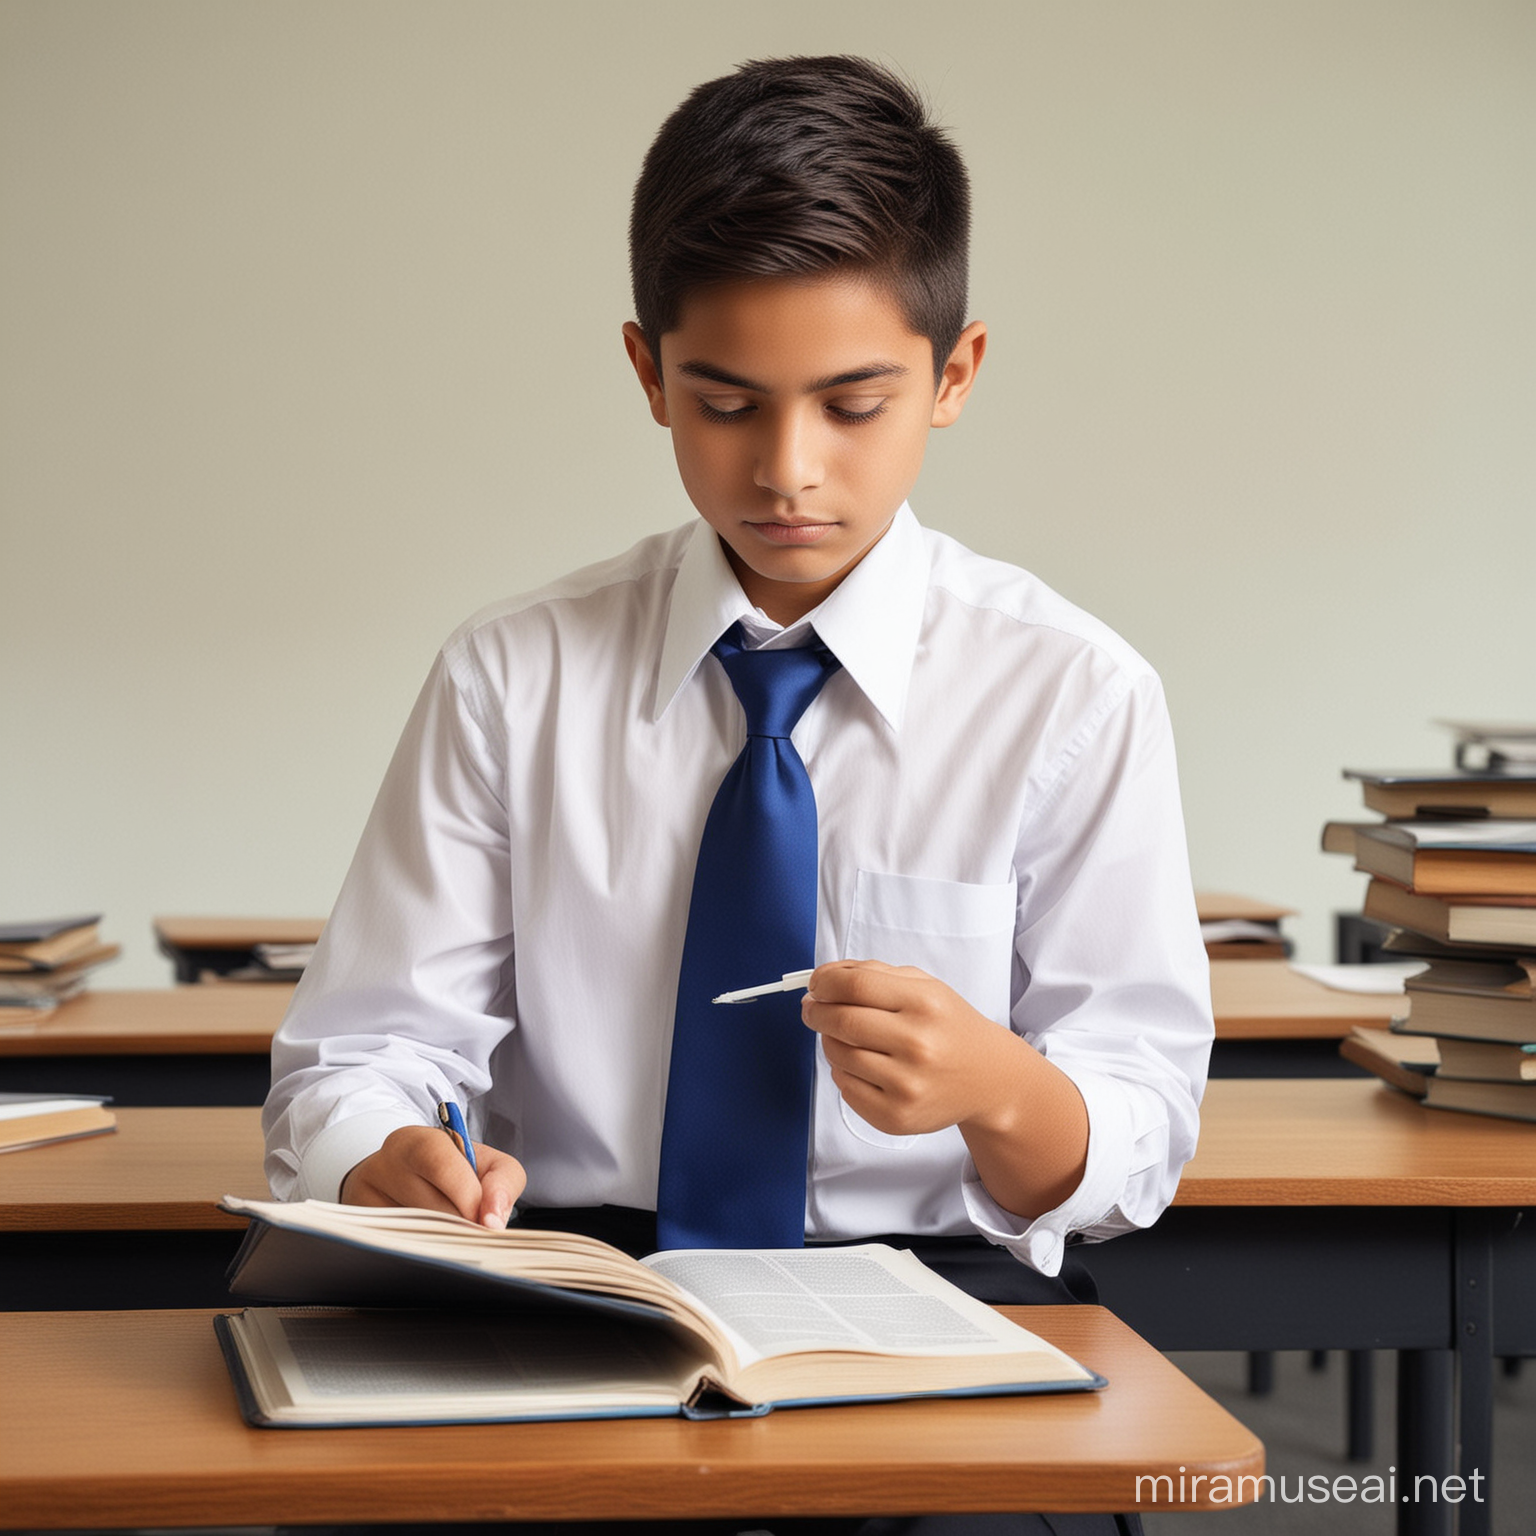 Create an image of small student studying in class room. Book should be in his hand. Unfirm colour=WHite Shirt, Blue Tie and Black pant 